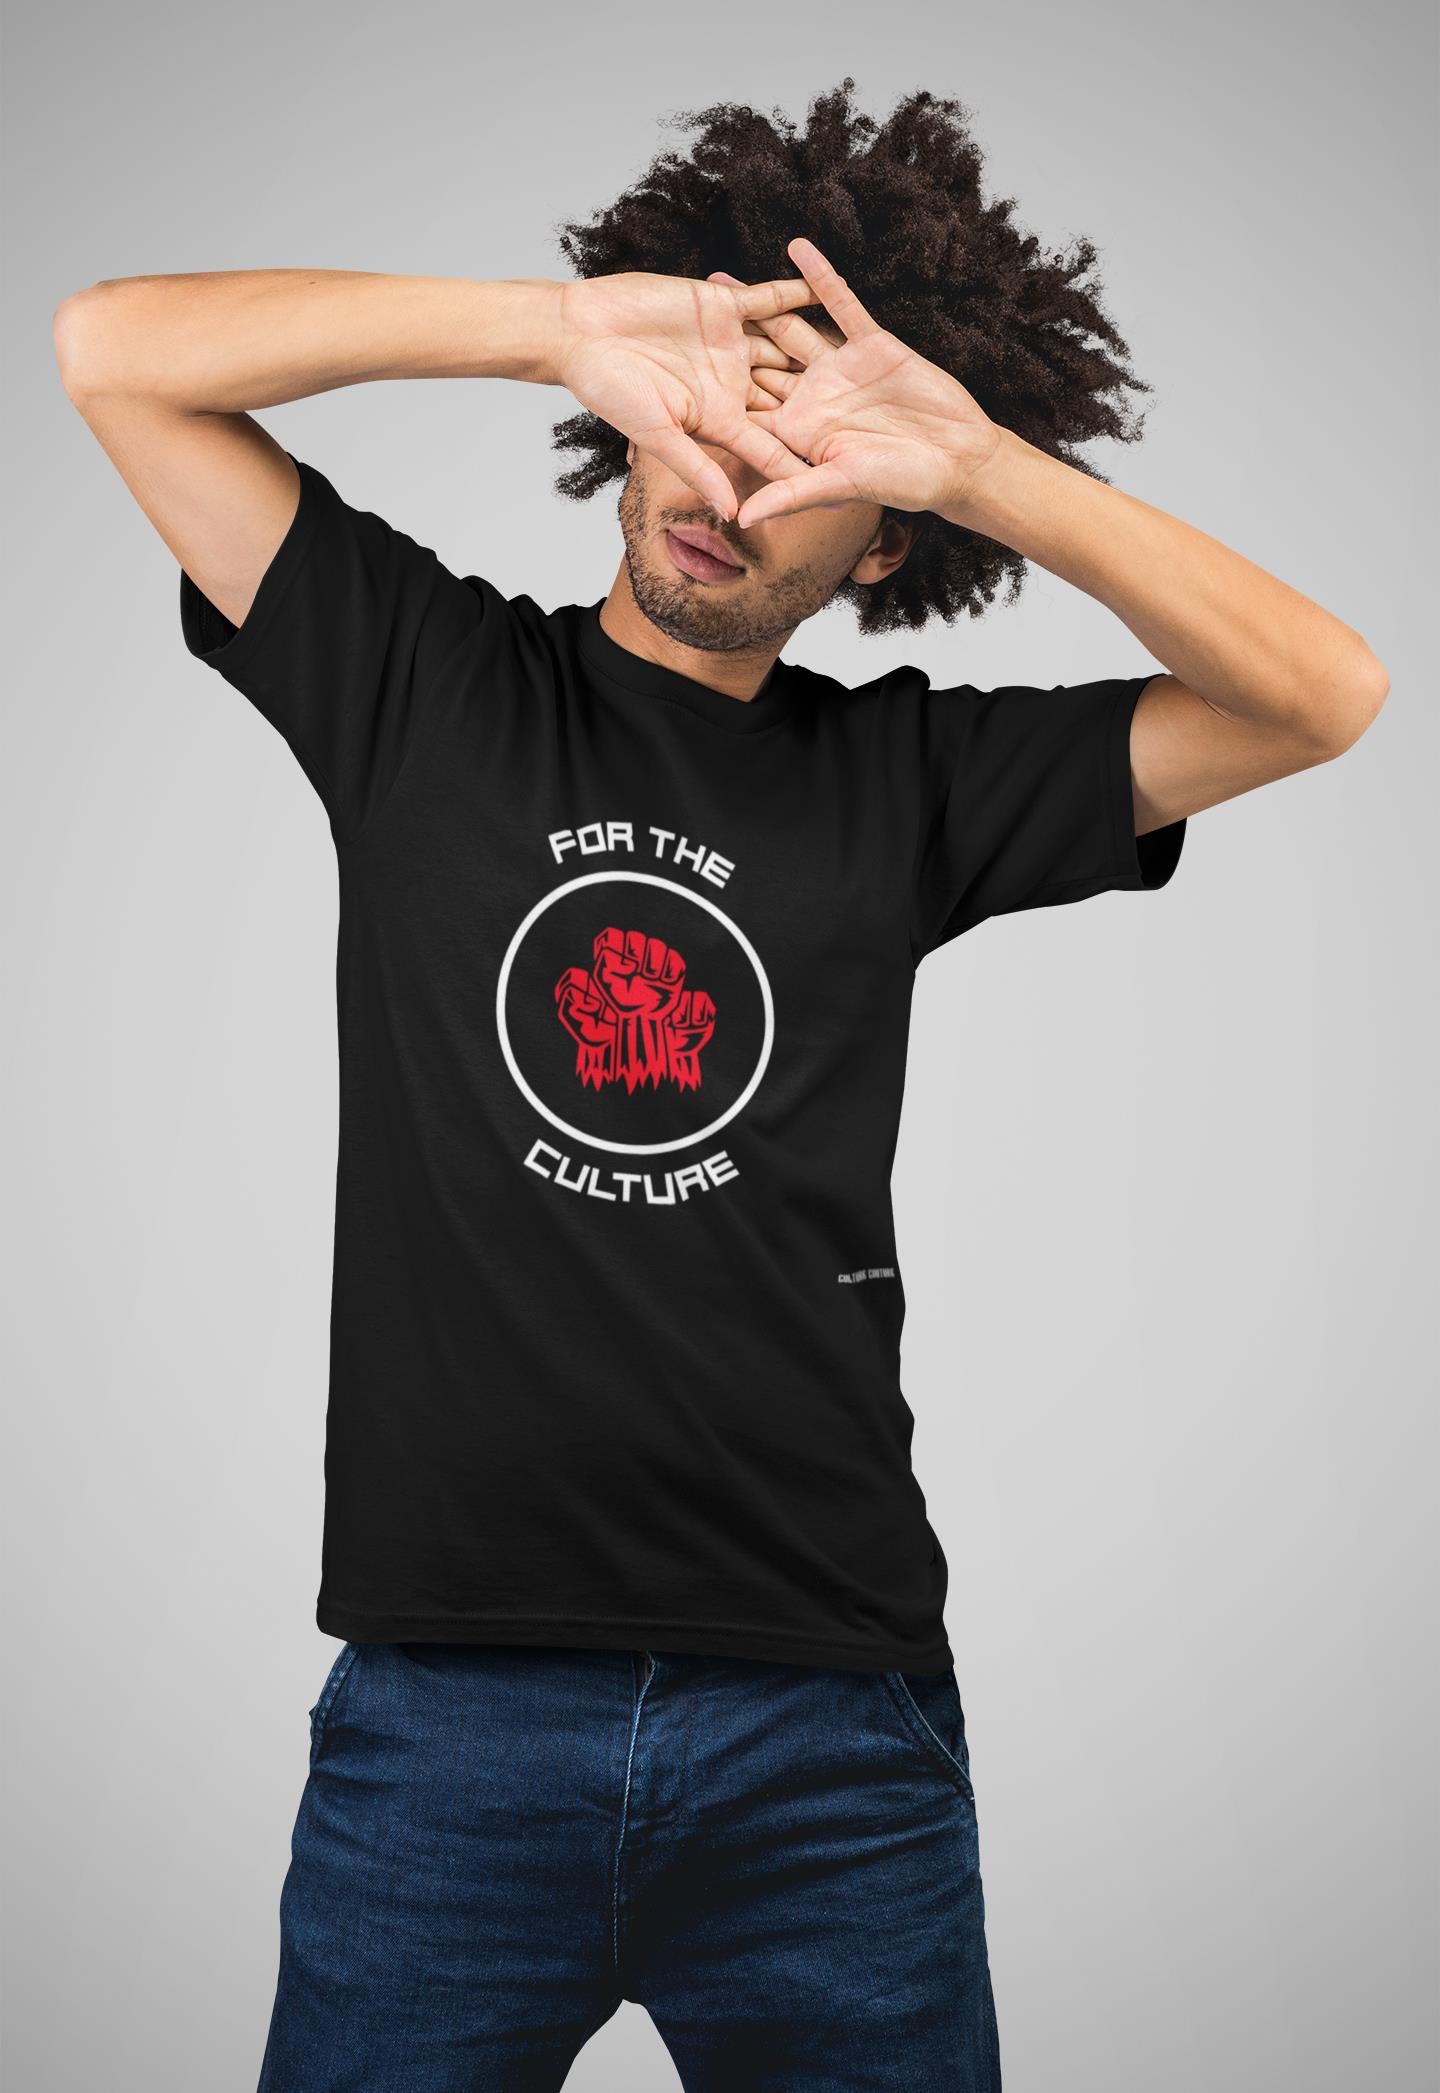 For The Culture T-Shirt/Black/White/Red